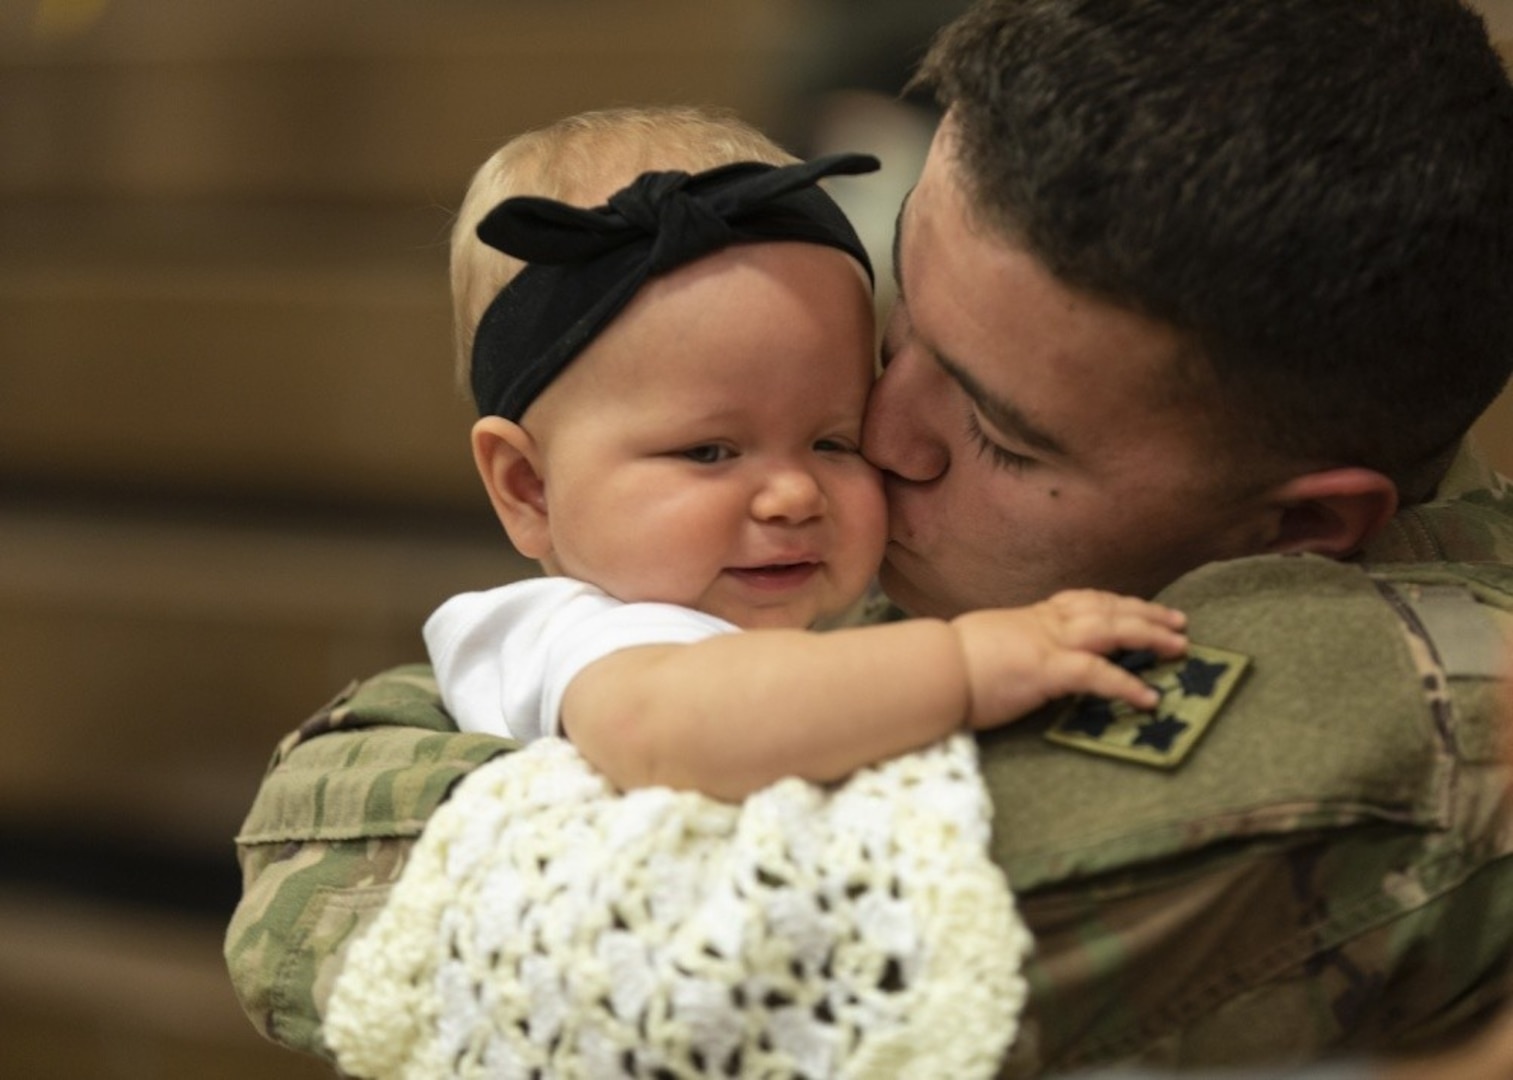 Spc. Dallas Ochoa, assigned to the 2nd Infantry Brigade Combat Team, 4th Infantry Division, reunites with his daughter, Kaylynn, following a homecoming ceremony at William Bill Reed Special Event Center, Fort Carson, Colorado, Nov. 13, 2018.